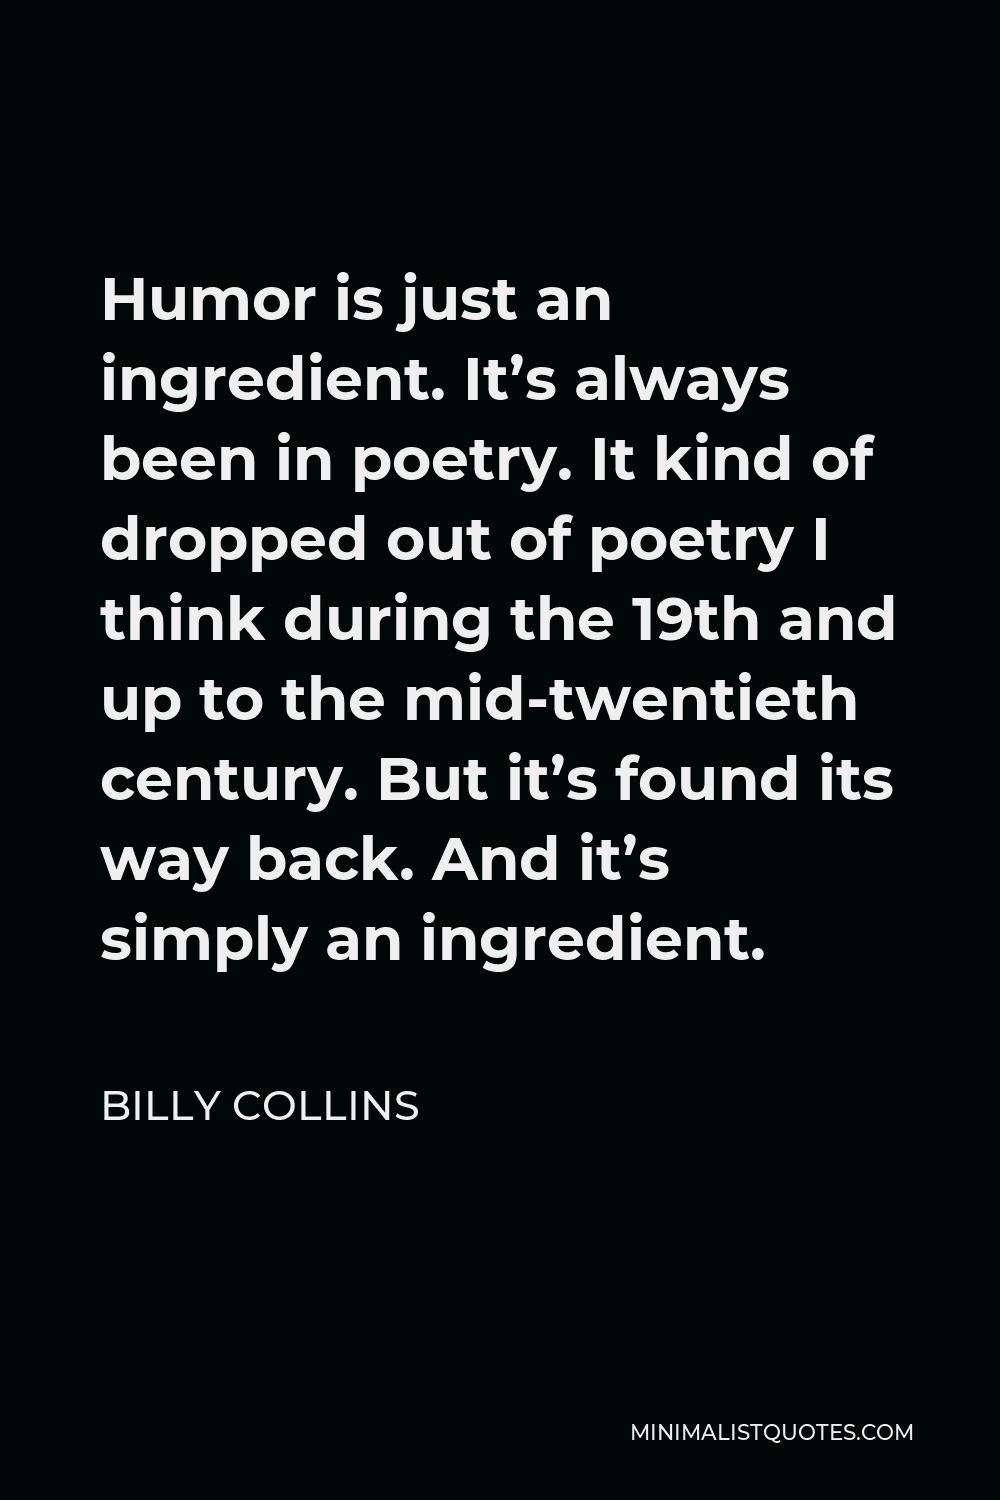 Billy Collins Quote - Humor is just an ingredient. It’s always been in poetry. It kind of dropped out of poetry I think during the 19th and up to the mid-twentieth century. But it’s found its way back. And it’s simply an ingredient.